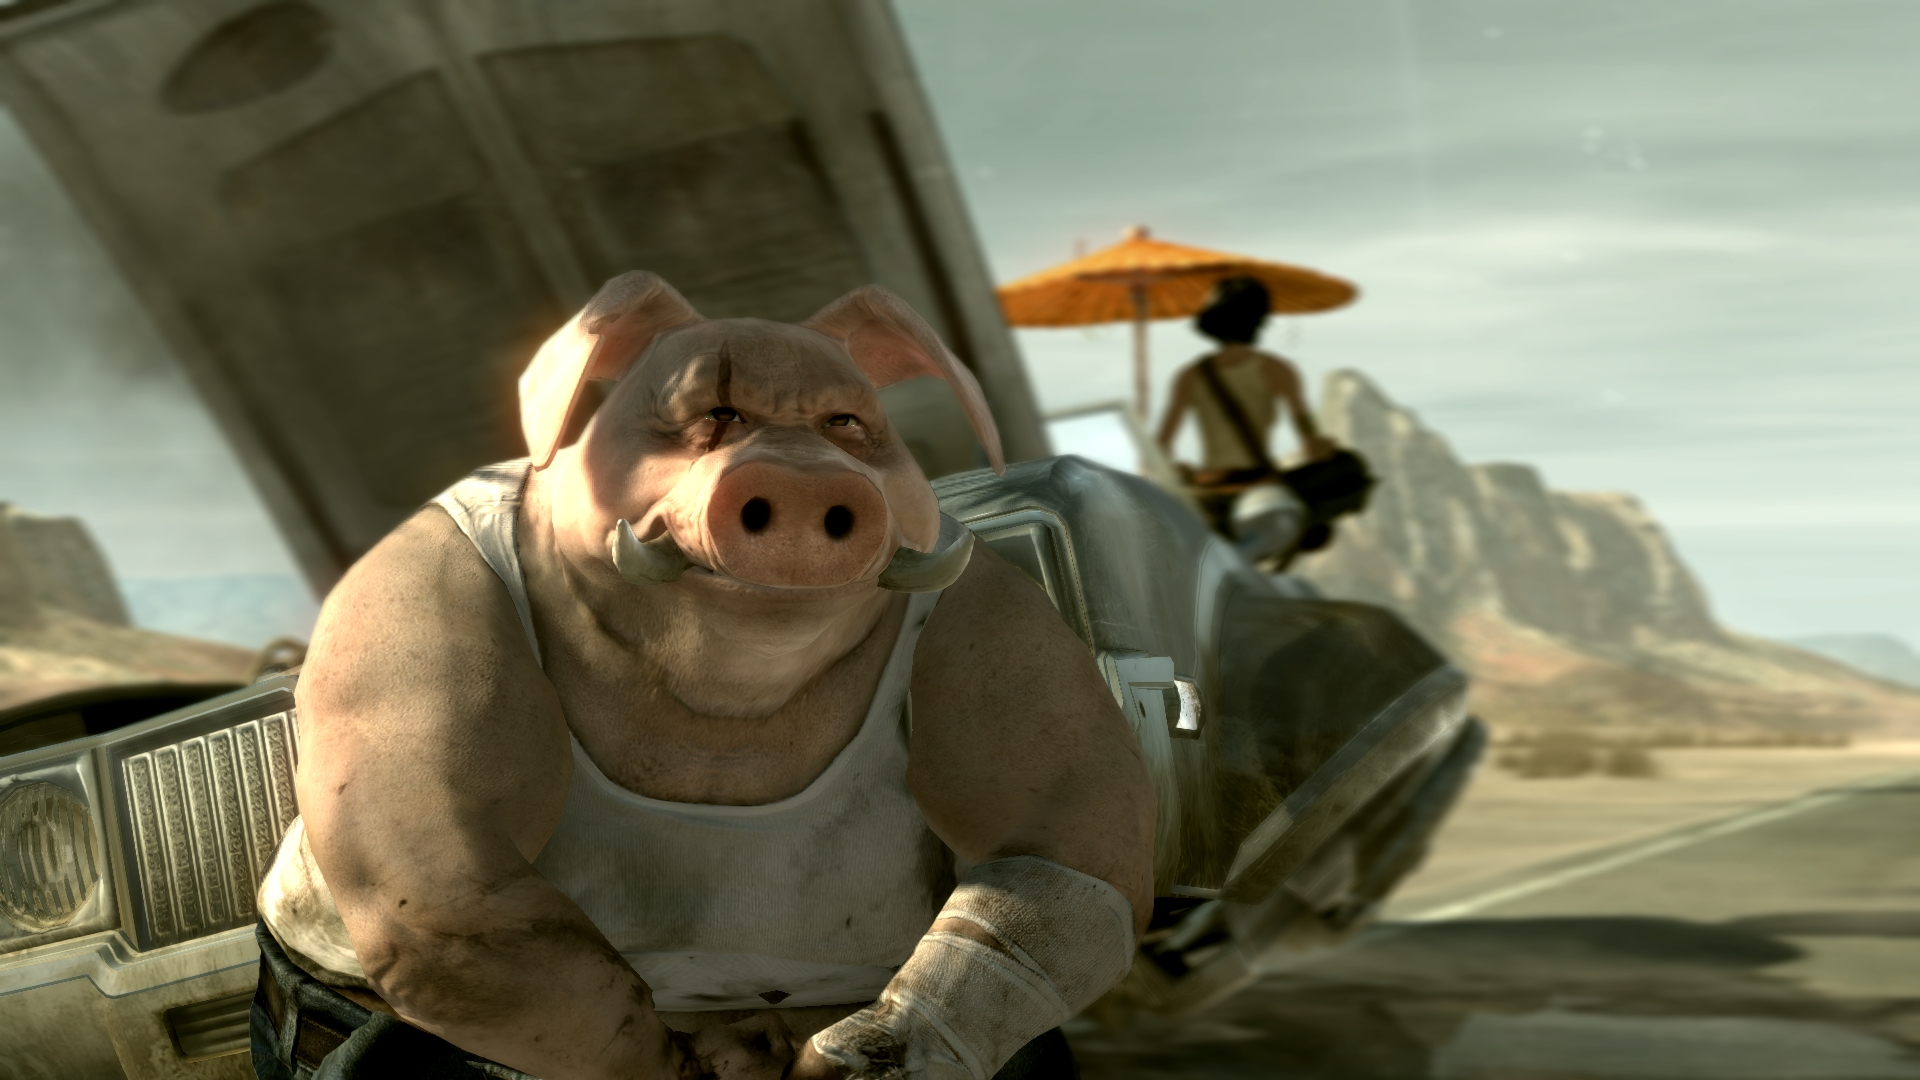 RUMOR: “Beyond Good & Evil” Sequel Funded by Nintendo - Another 